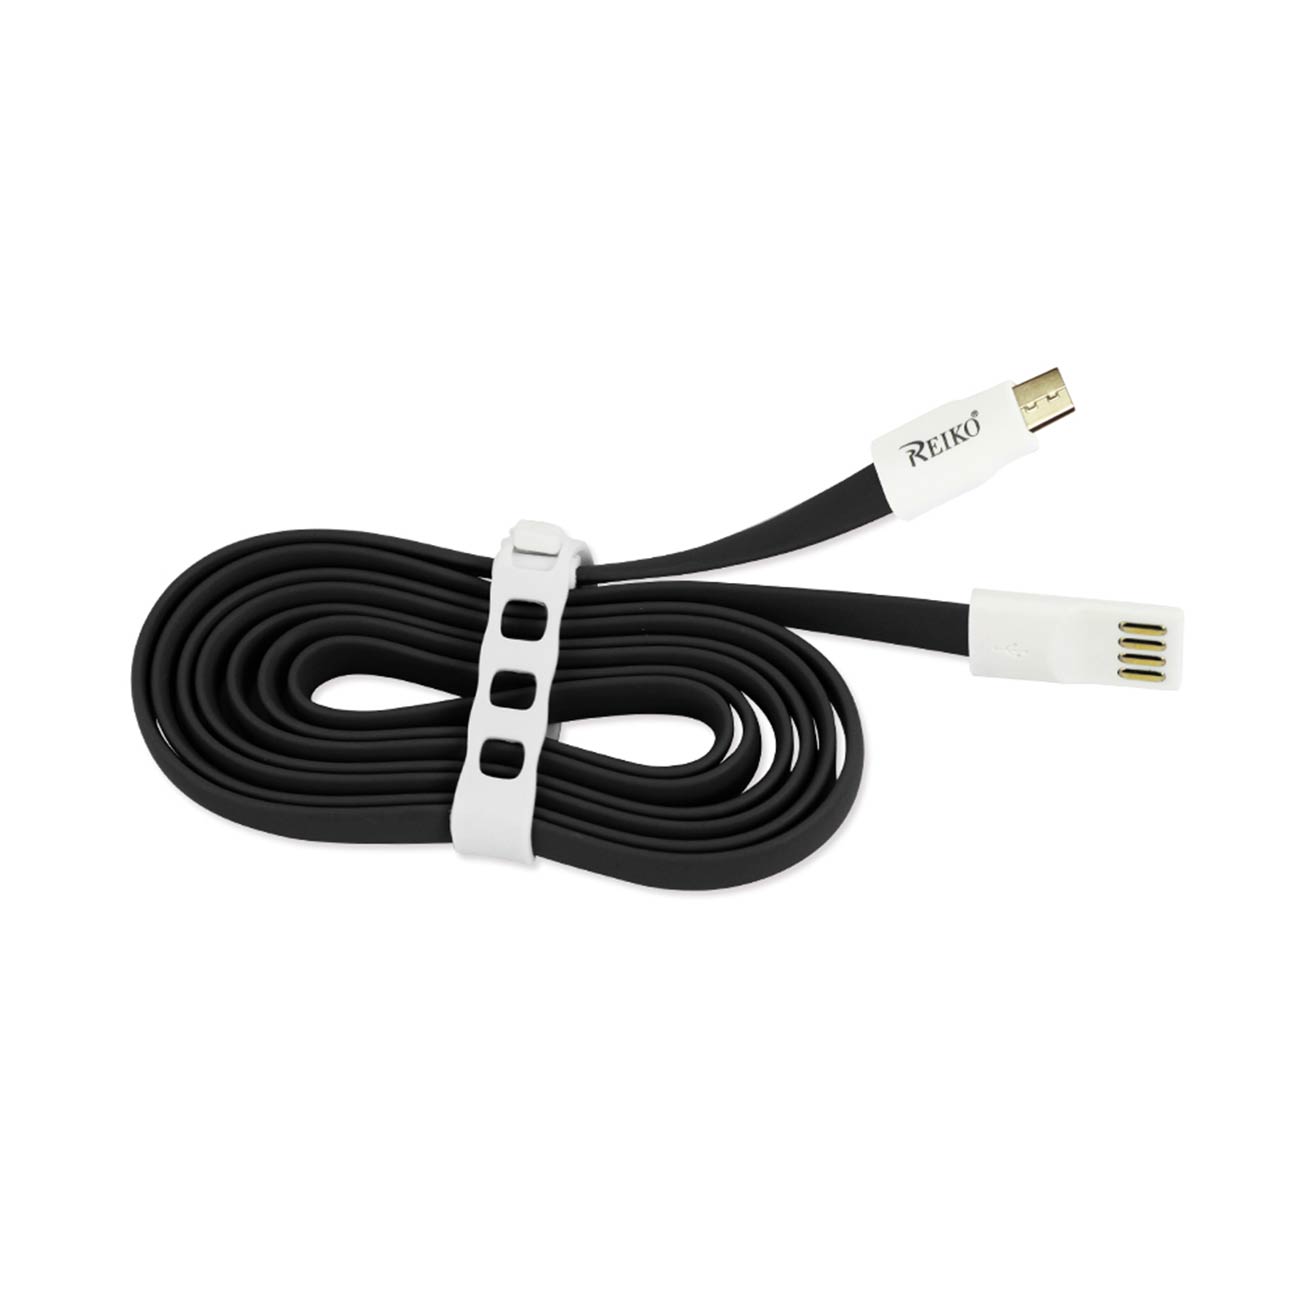 Data Cable USB Flat Micro Gold Plated 3.9Ft With Cable Tie Black Color